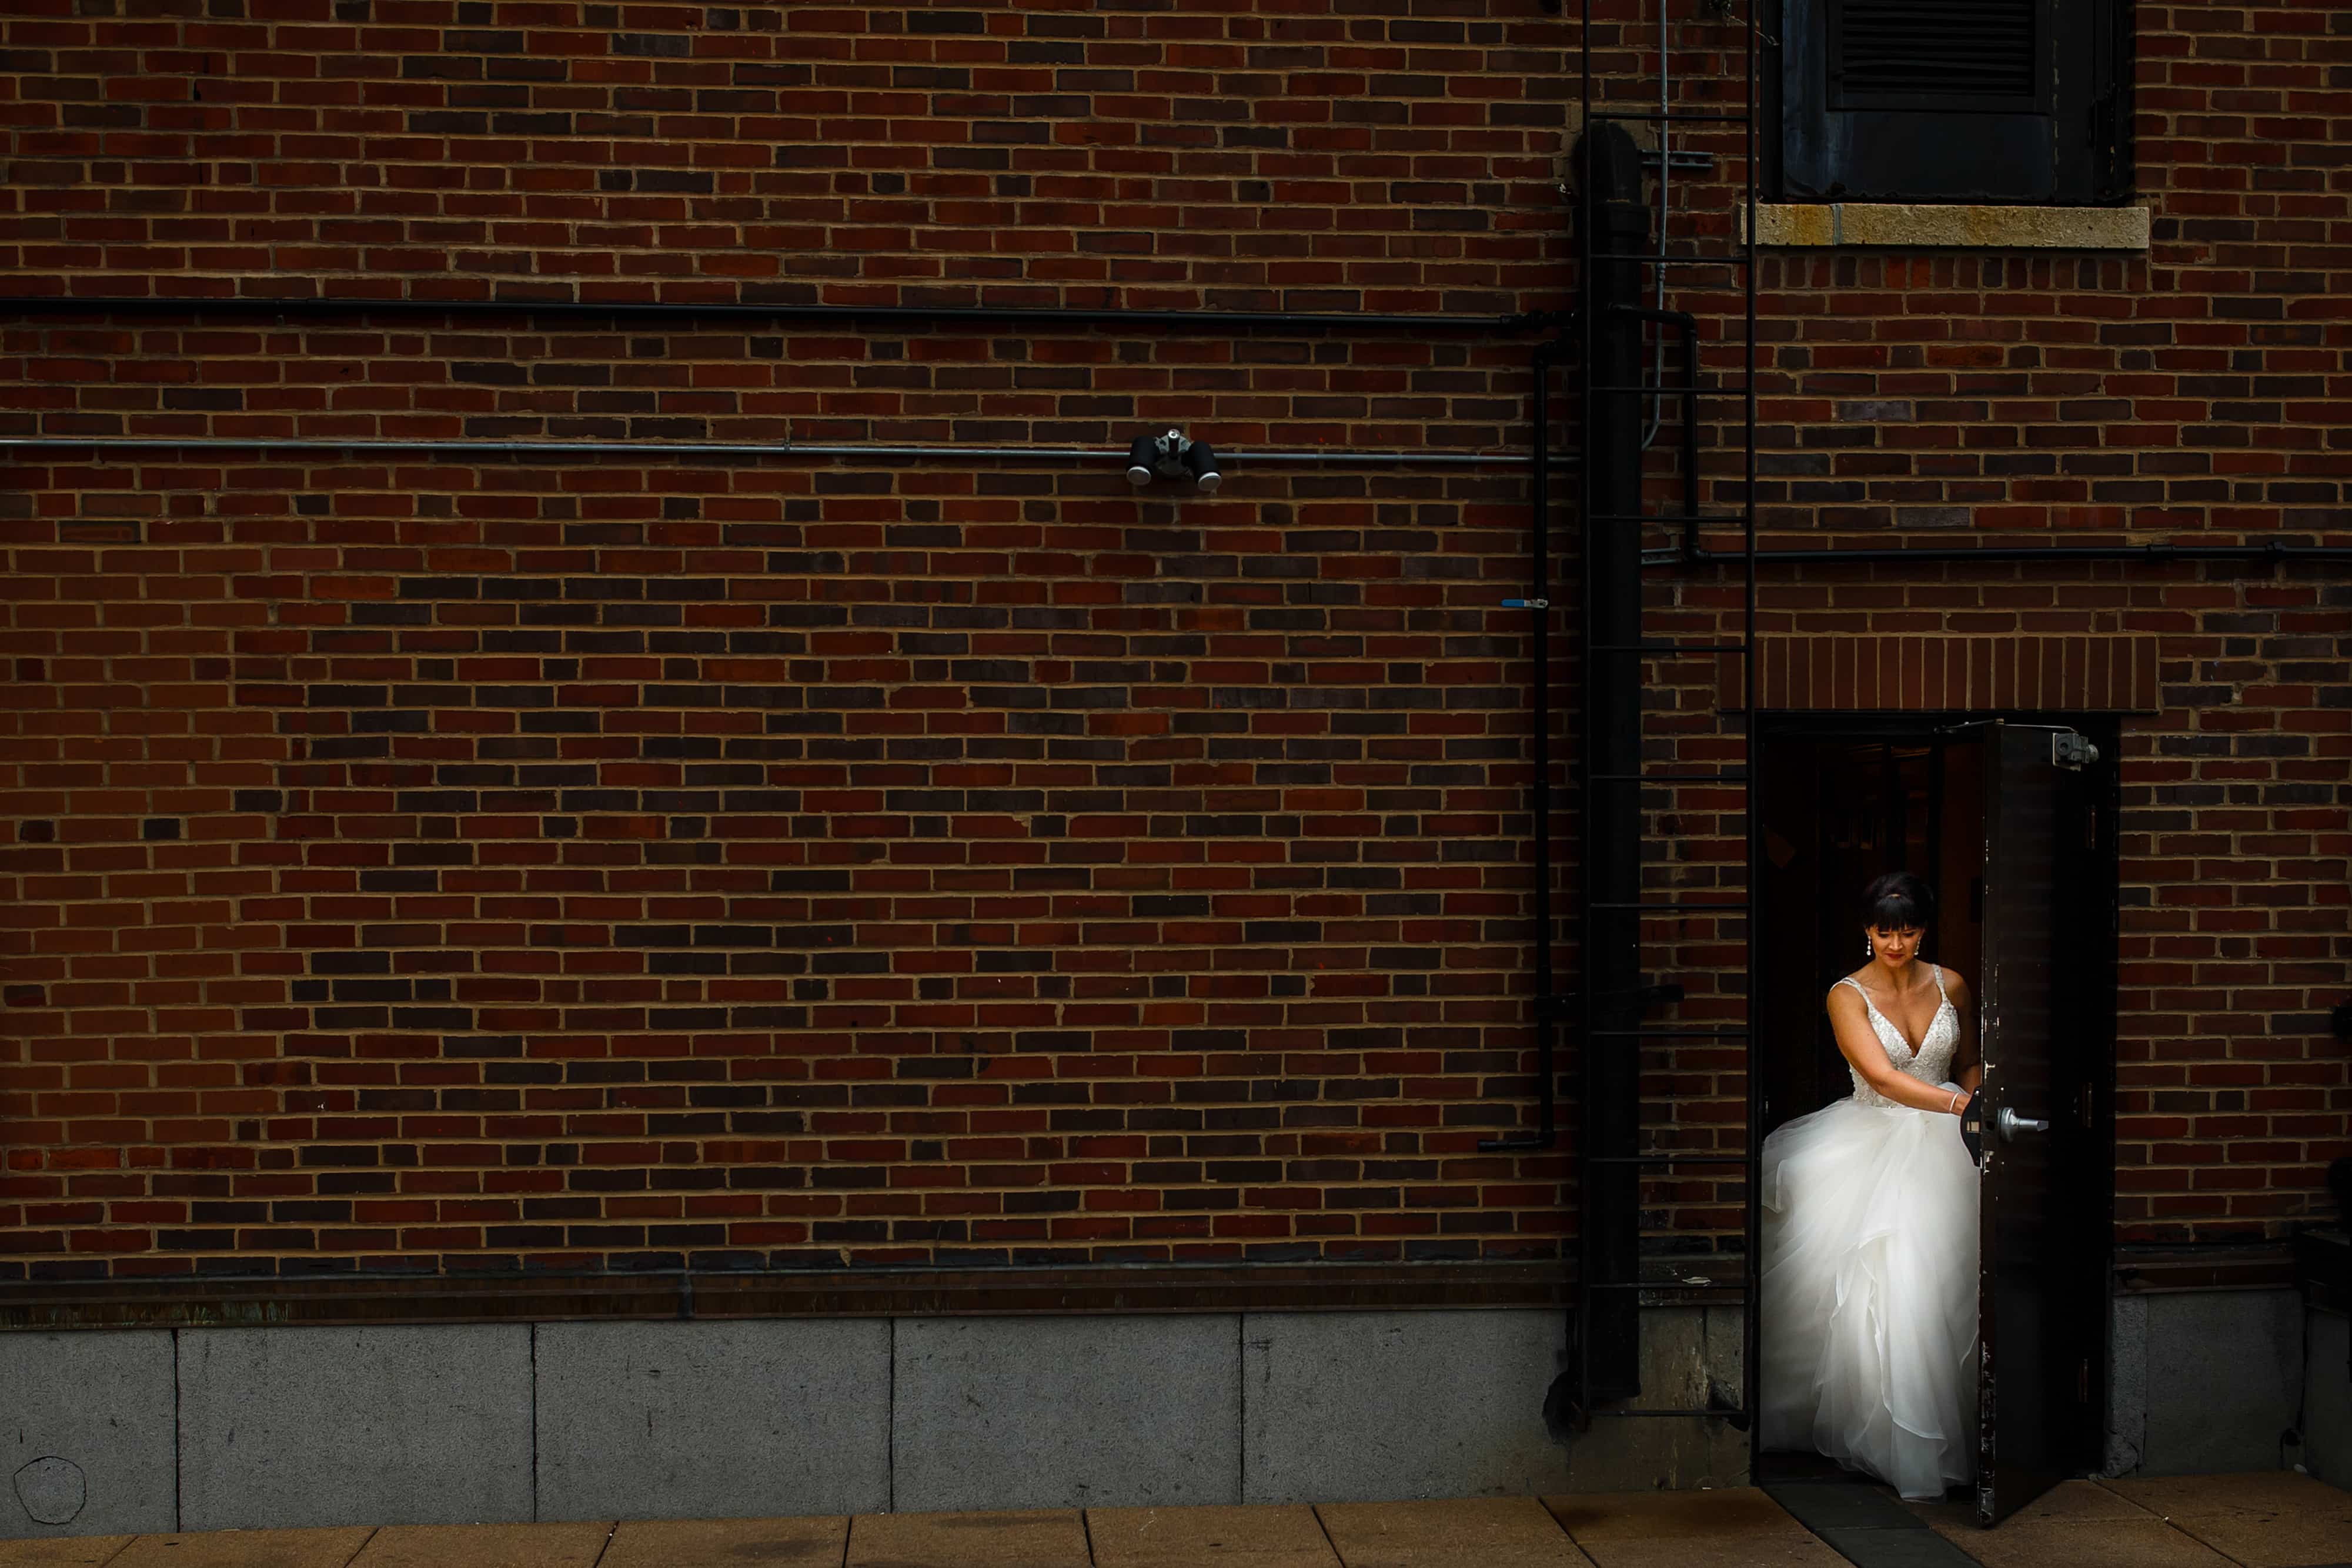 The bride walks out onto the rooftop in Chicago